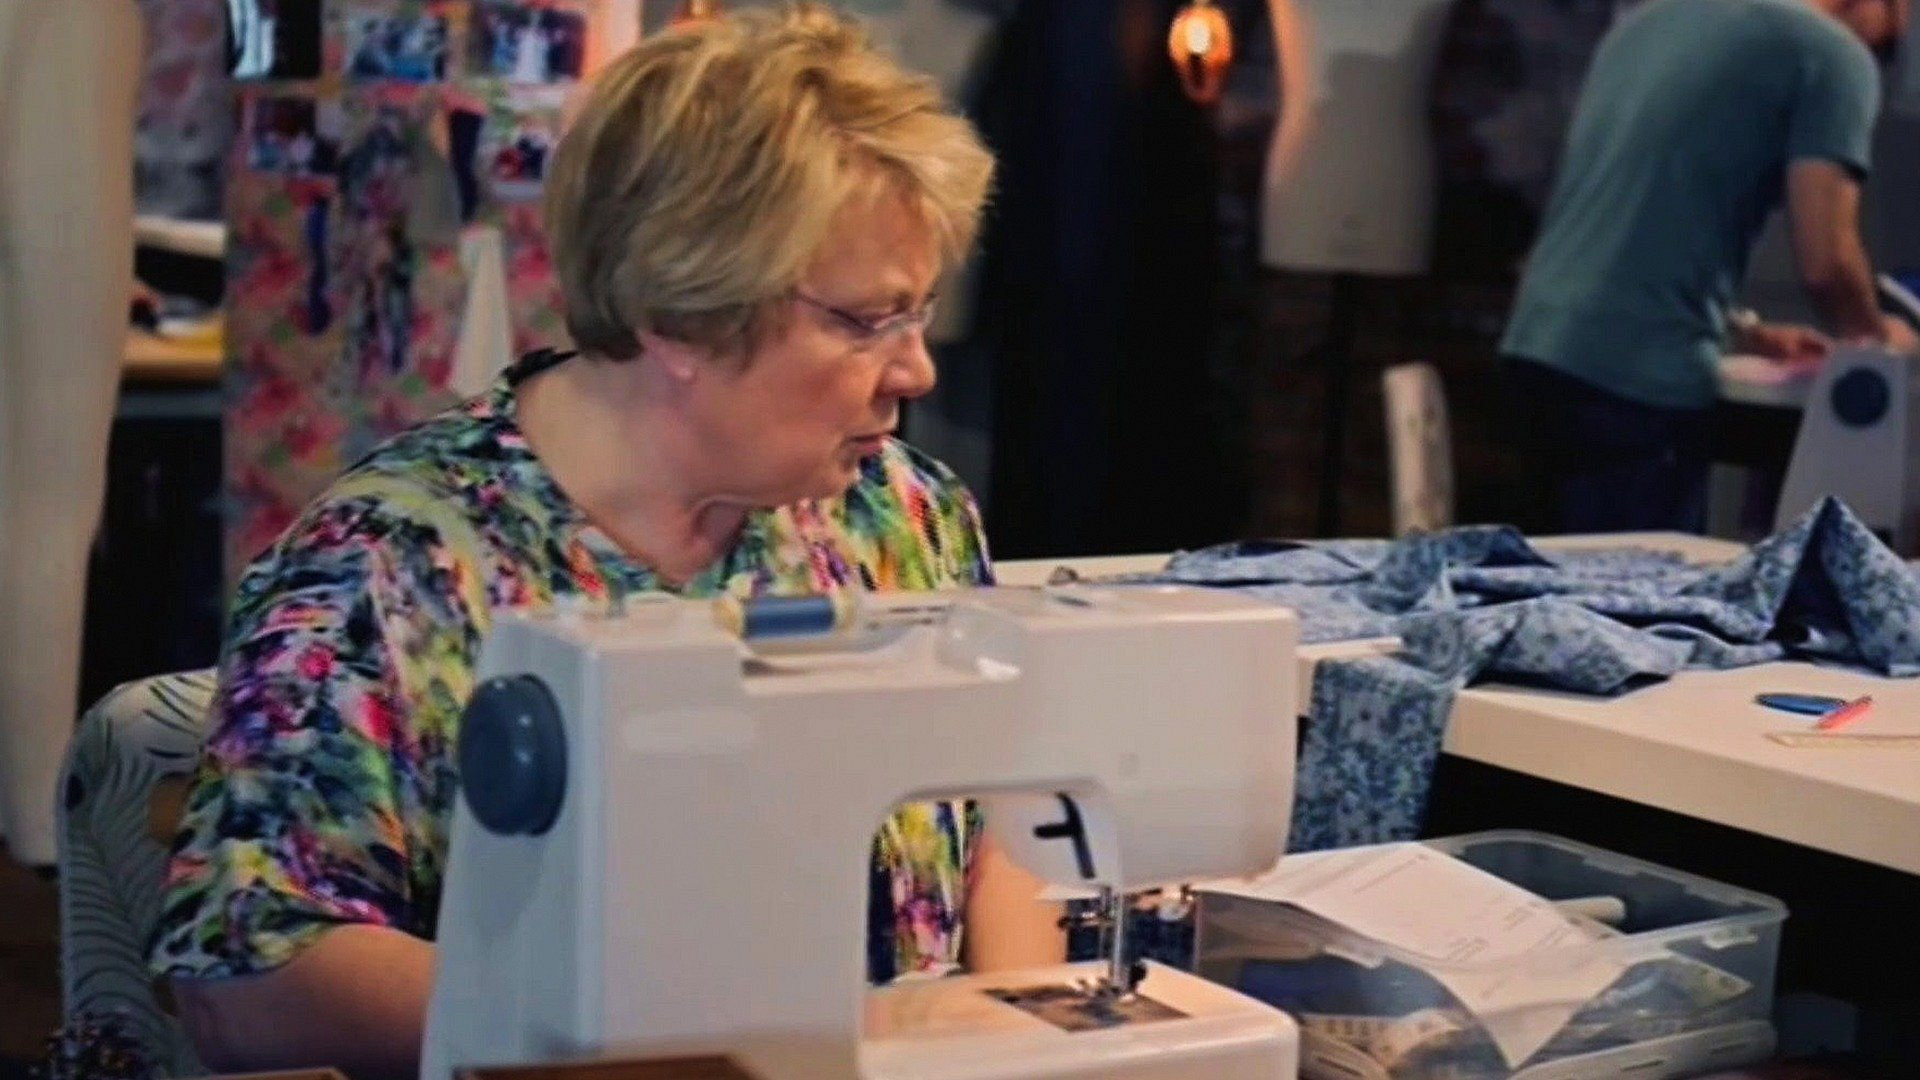 The Great British Sewing Bee